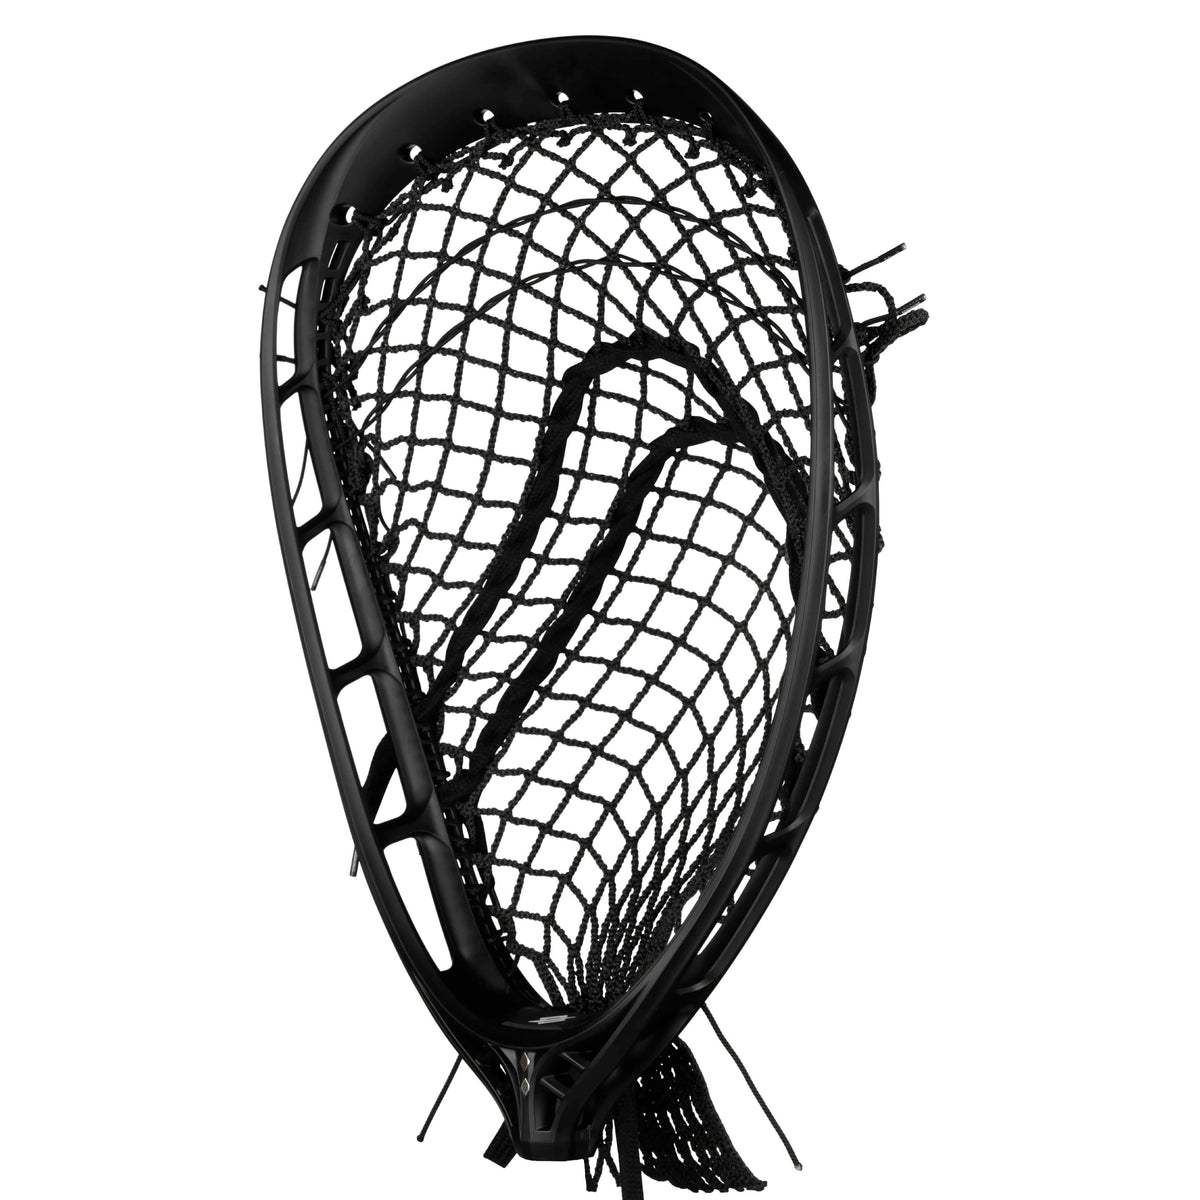 StringKing Mark 2G Goalie Strung Grizzly 2 Lacrosse Head